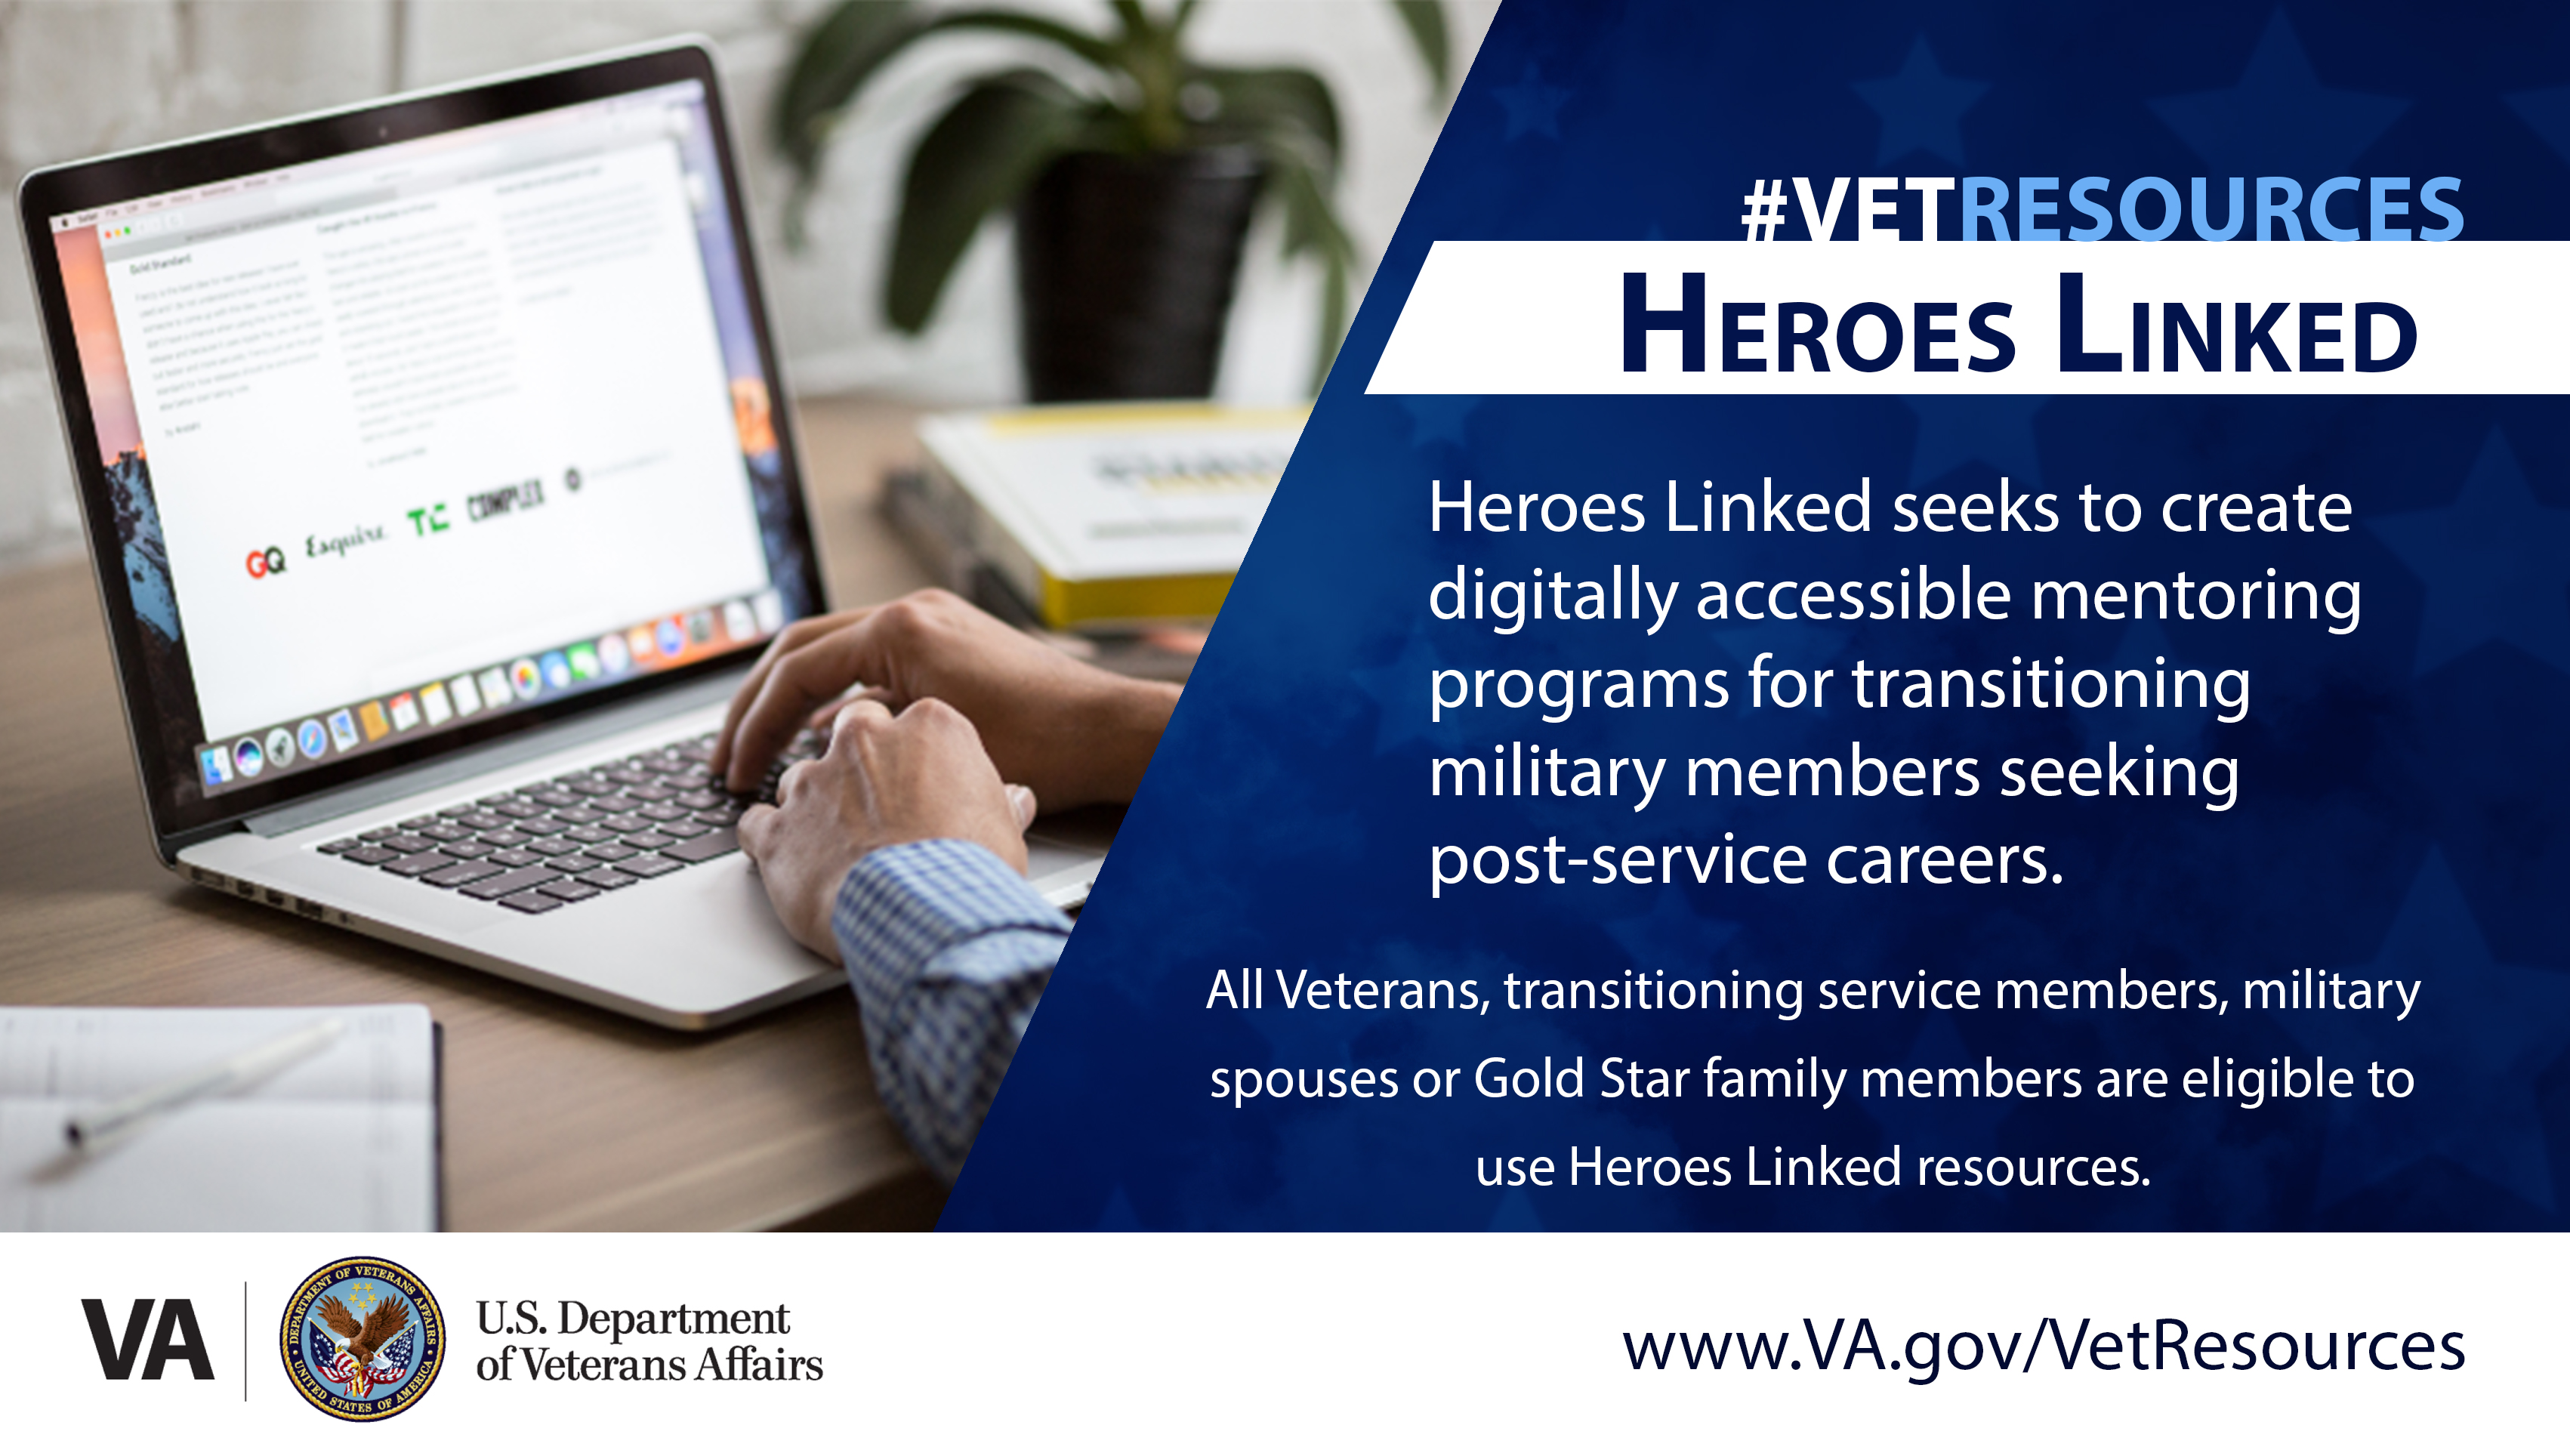 Heroes Linked offers online mentoring and career finding free to Veterans.